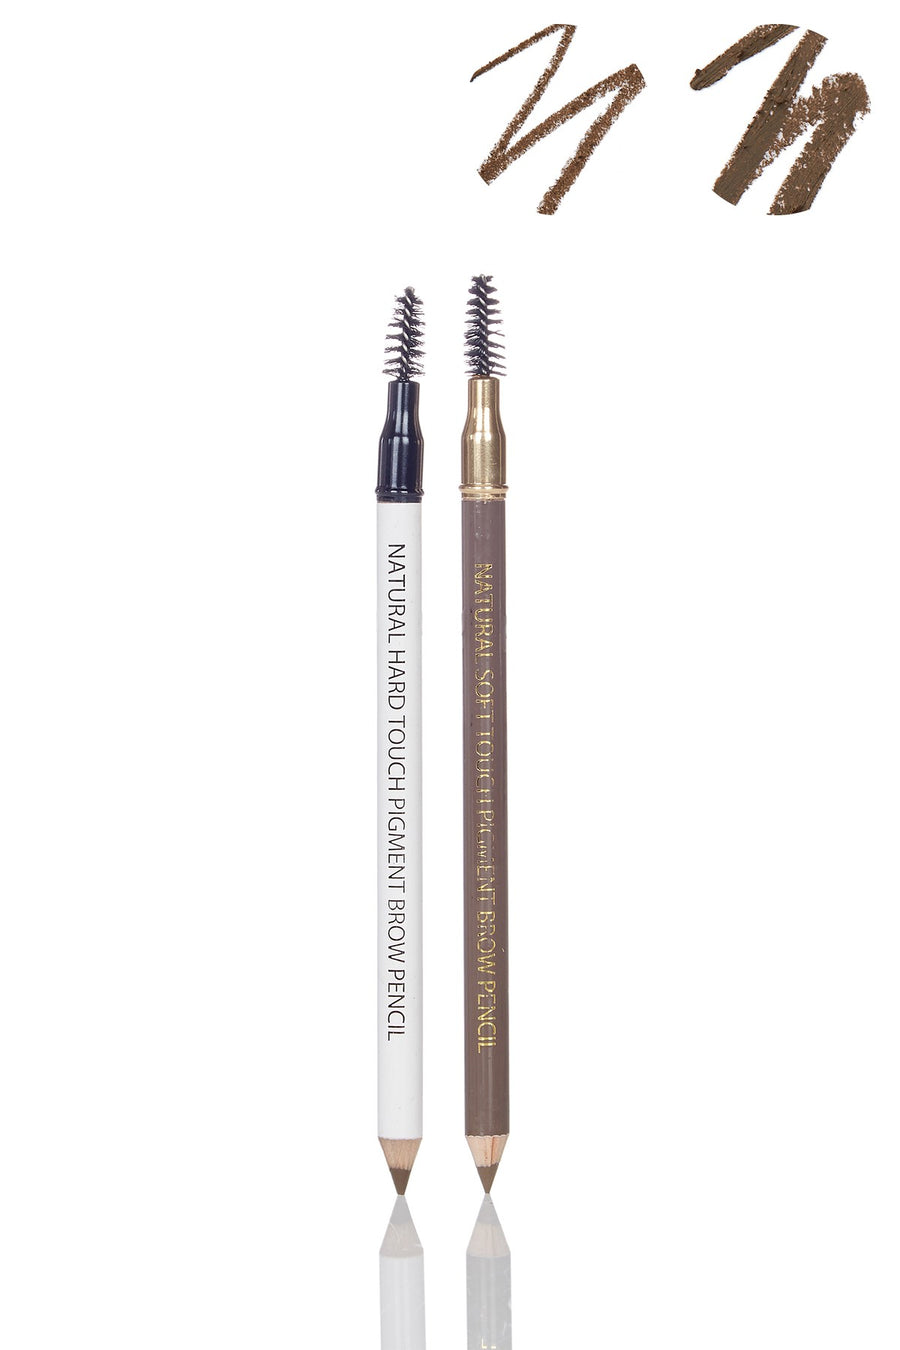 Universal Brow Definer - Set of Soft Touch & Hard Touch Universal Formula Professional Eyebrow Pencils - Blend Mineral Cosmetics